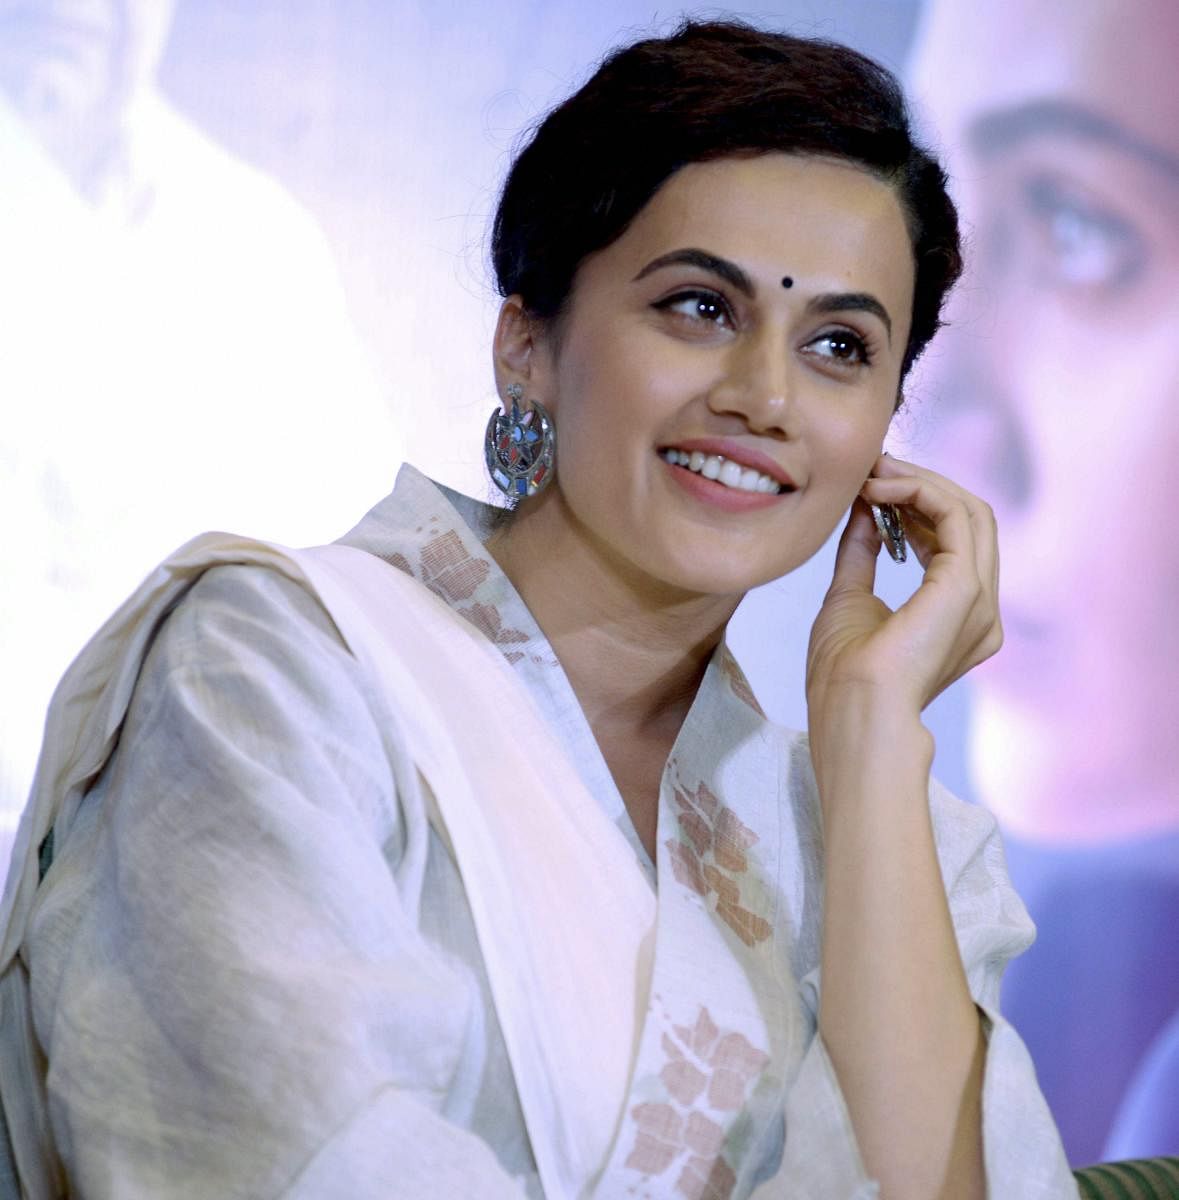 Bollywood actress Taapsee Pannu at a promotional event for their film 'Mulk', in New Delhi on Monday, July 23, 2018. (PTI Photo)